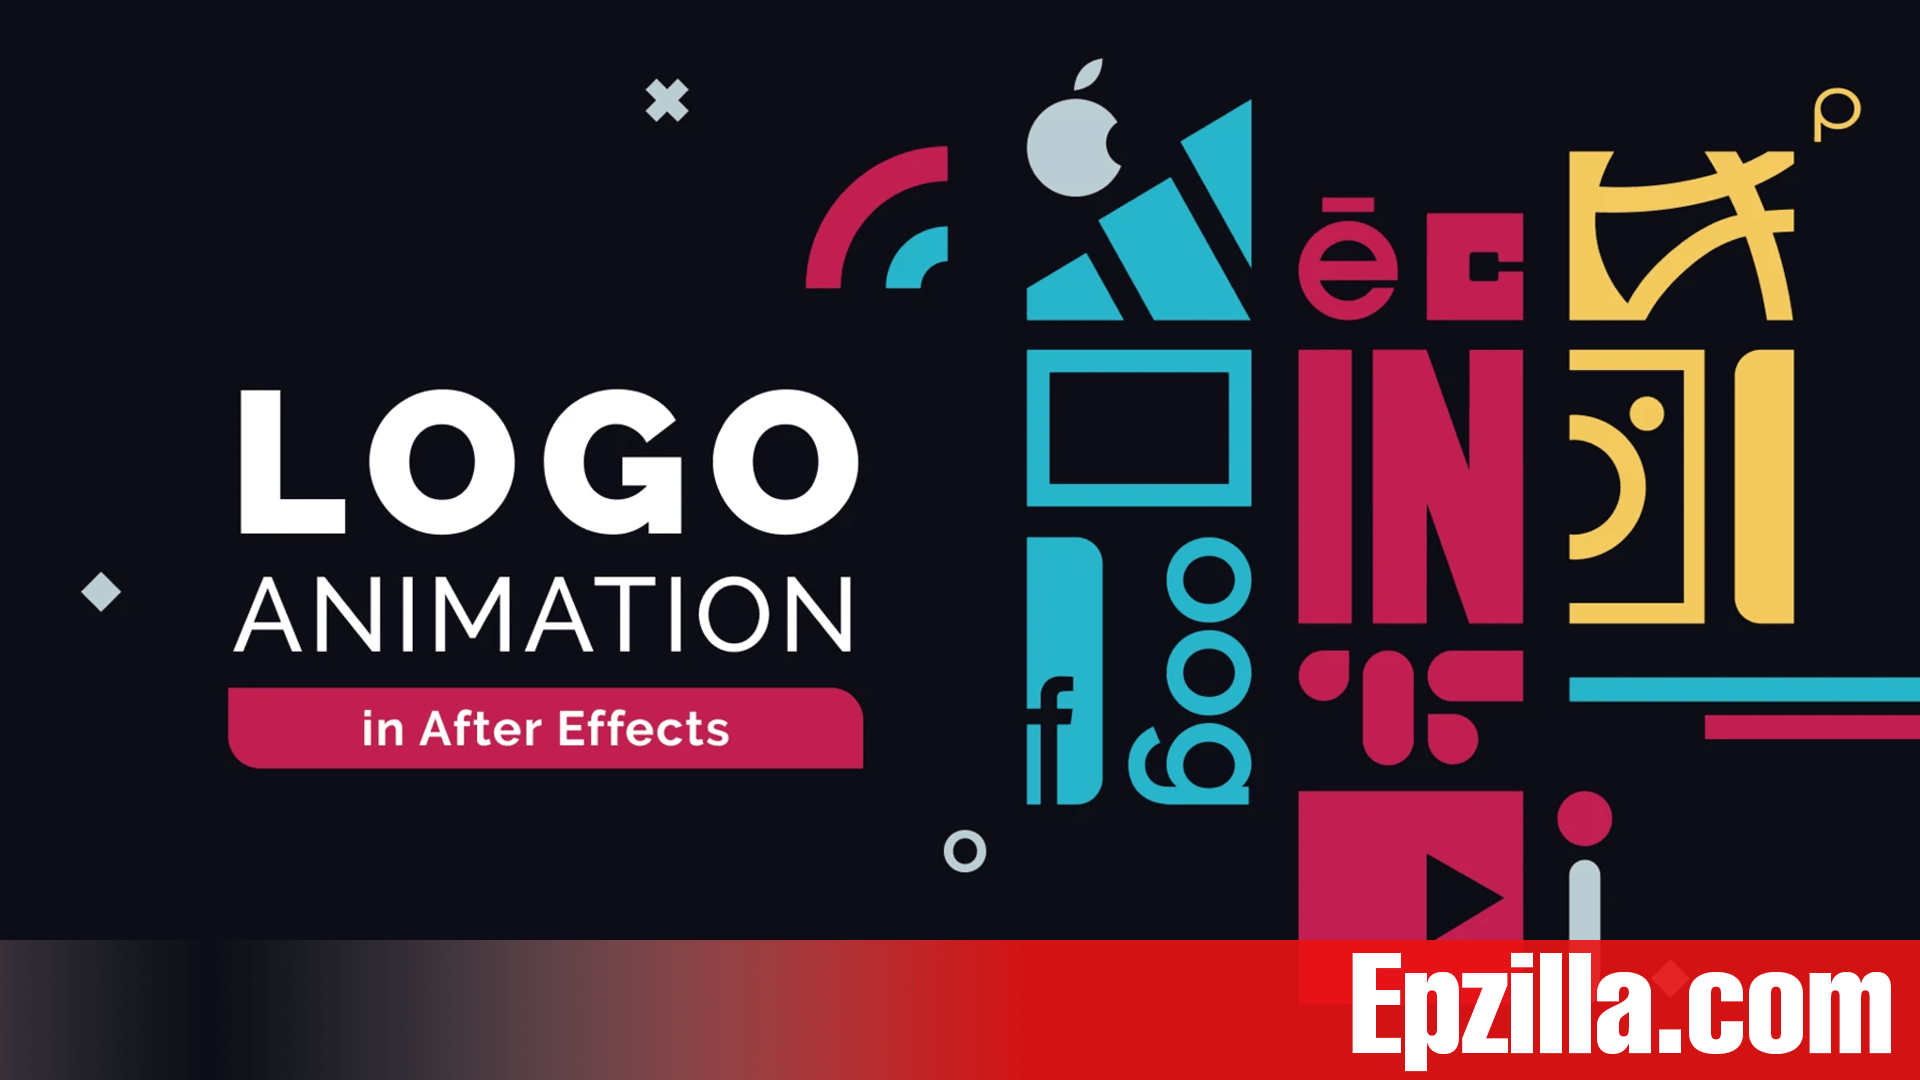 Motion-Design-School-Logo-Animation-in-After-Effects-Full-Course-Free-Download-Epzilla.com